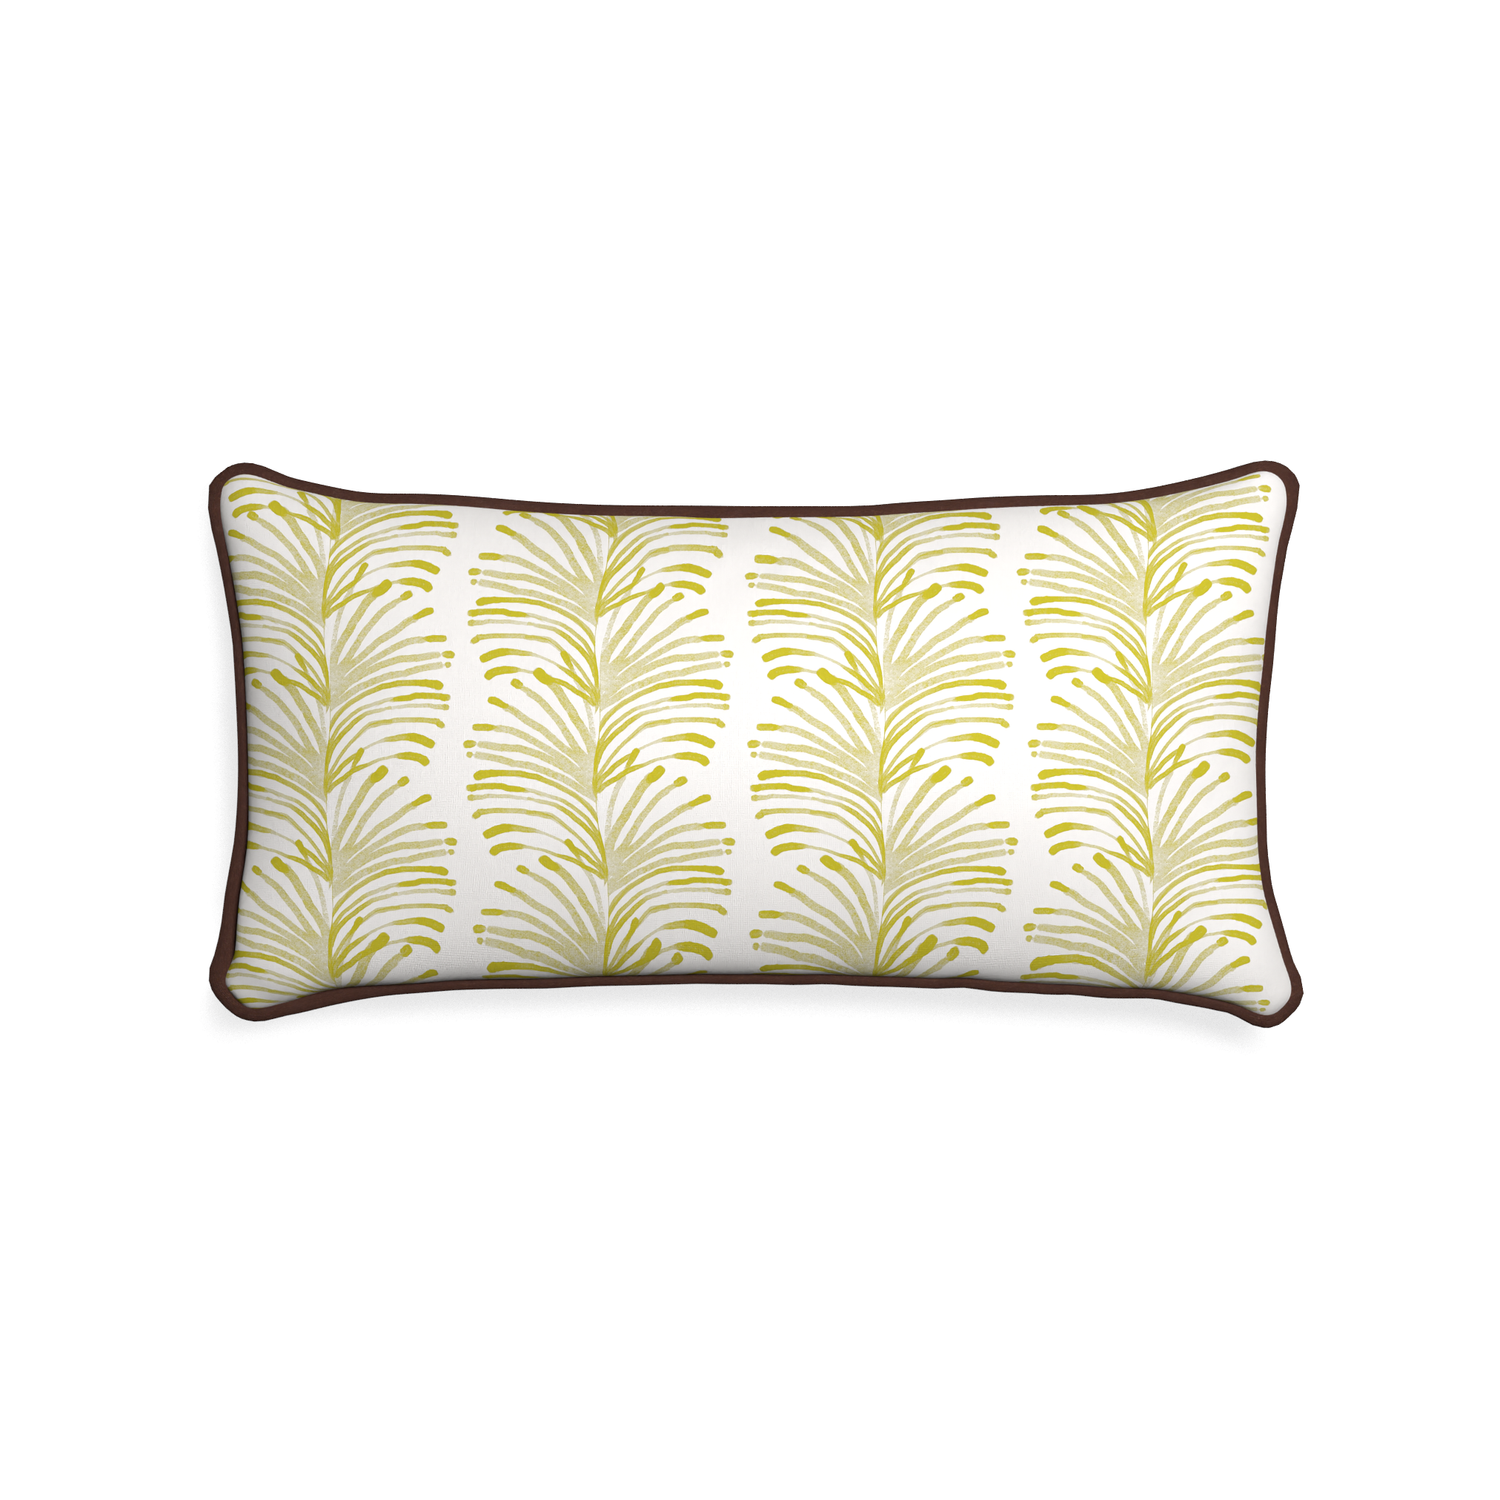 Midi-lumbar emma chartreuse custom yellow stripe chartreusepillow with w piping on white background